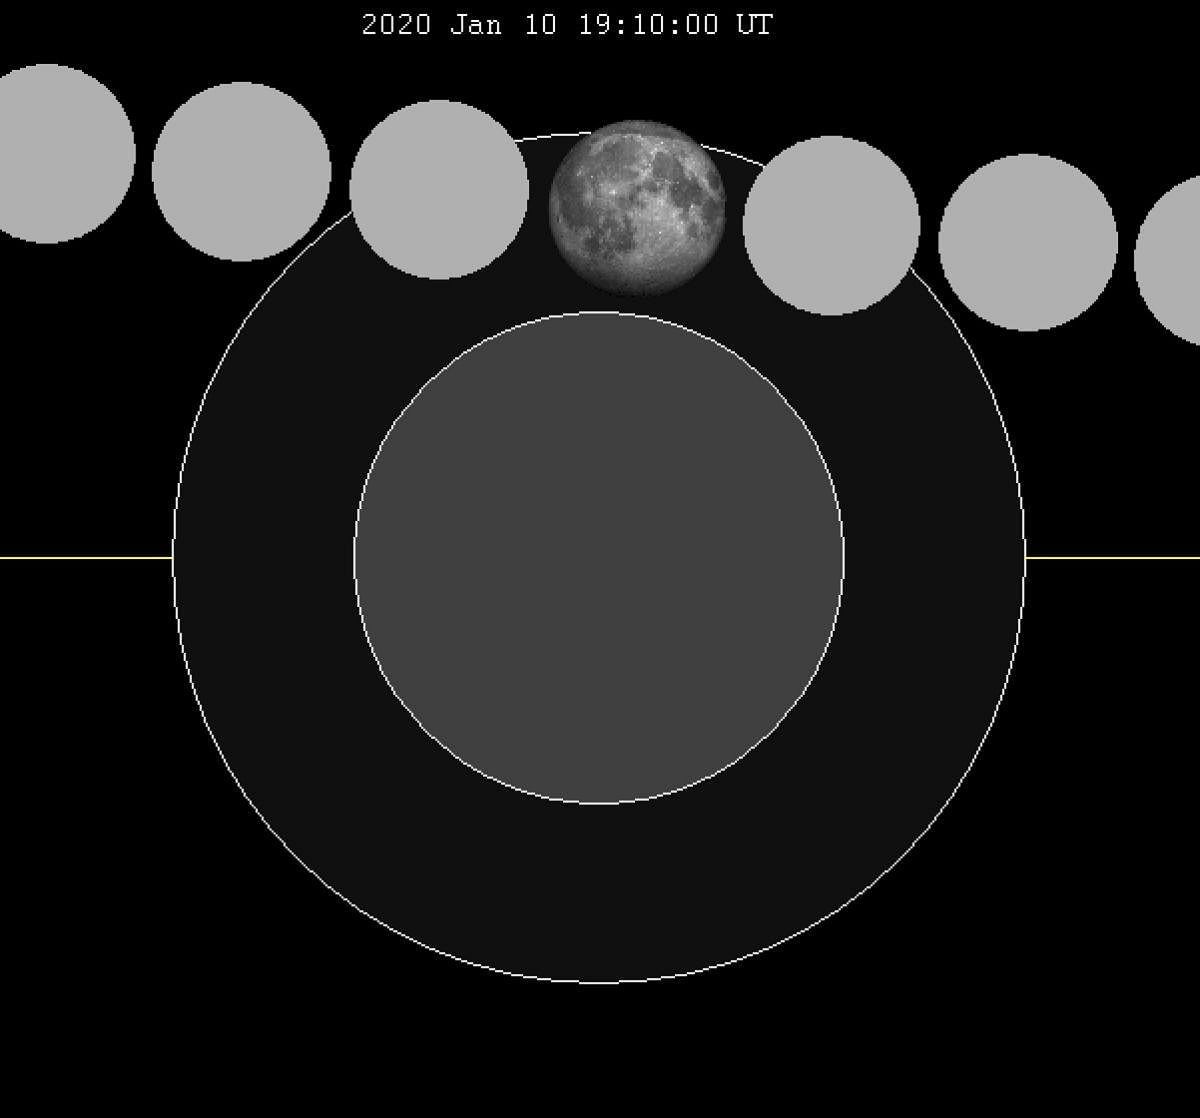 The boundary between umbra and penumbra is not quite as sharp as shown in the textbook drawings. The moon will move completely into the penumbra at 00:40 am of January 11.